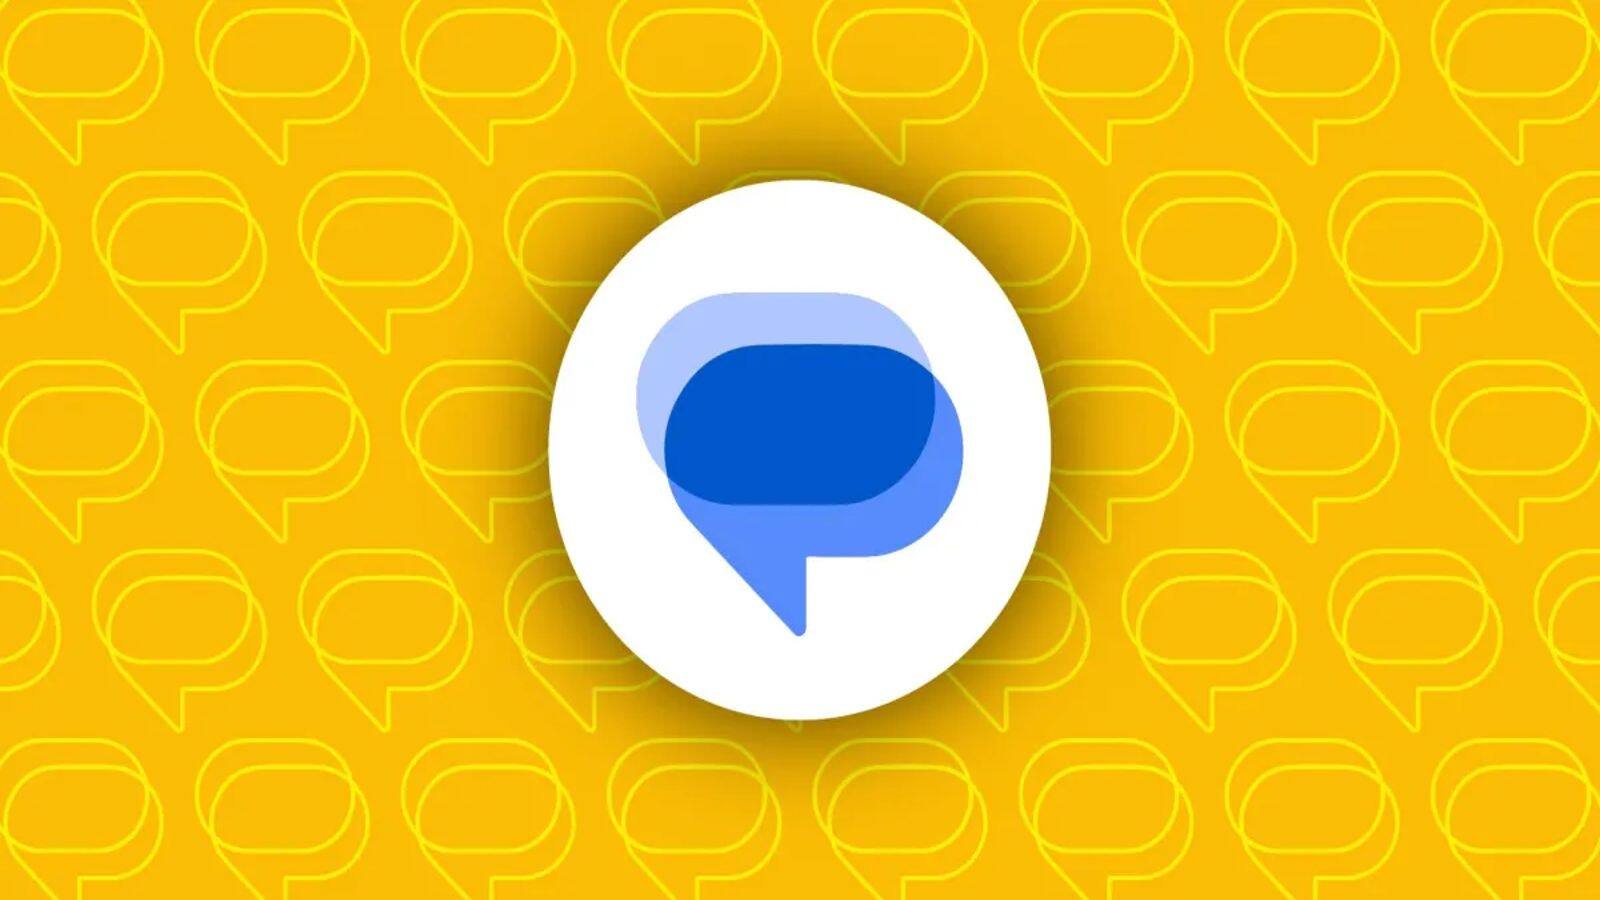 Google Messages rolls out Custom Bubbles for RCS chats